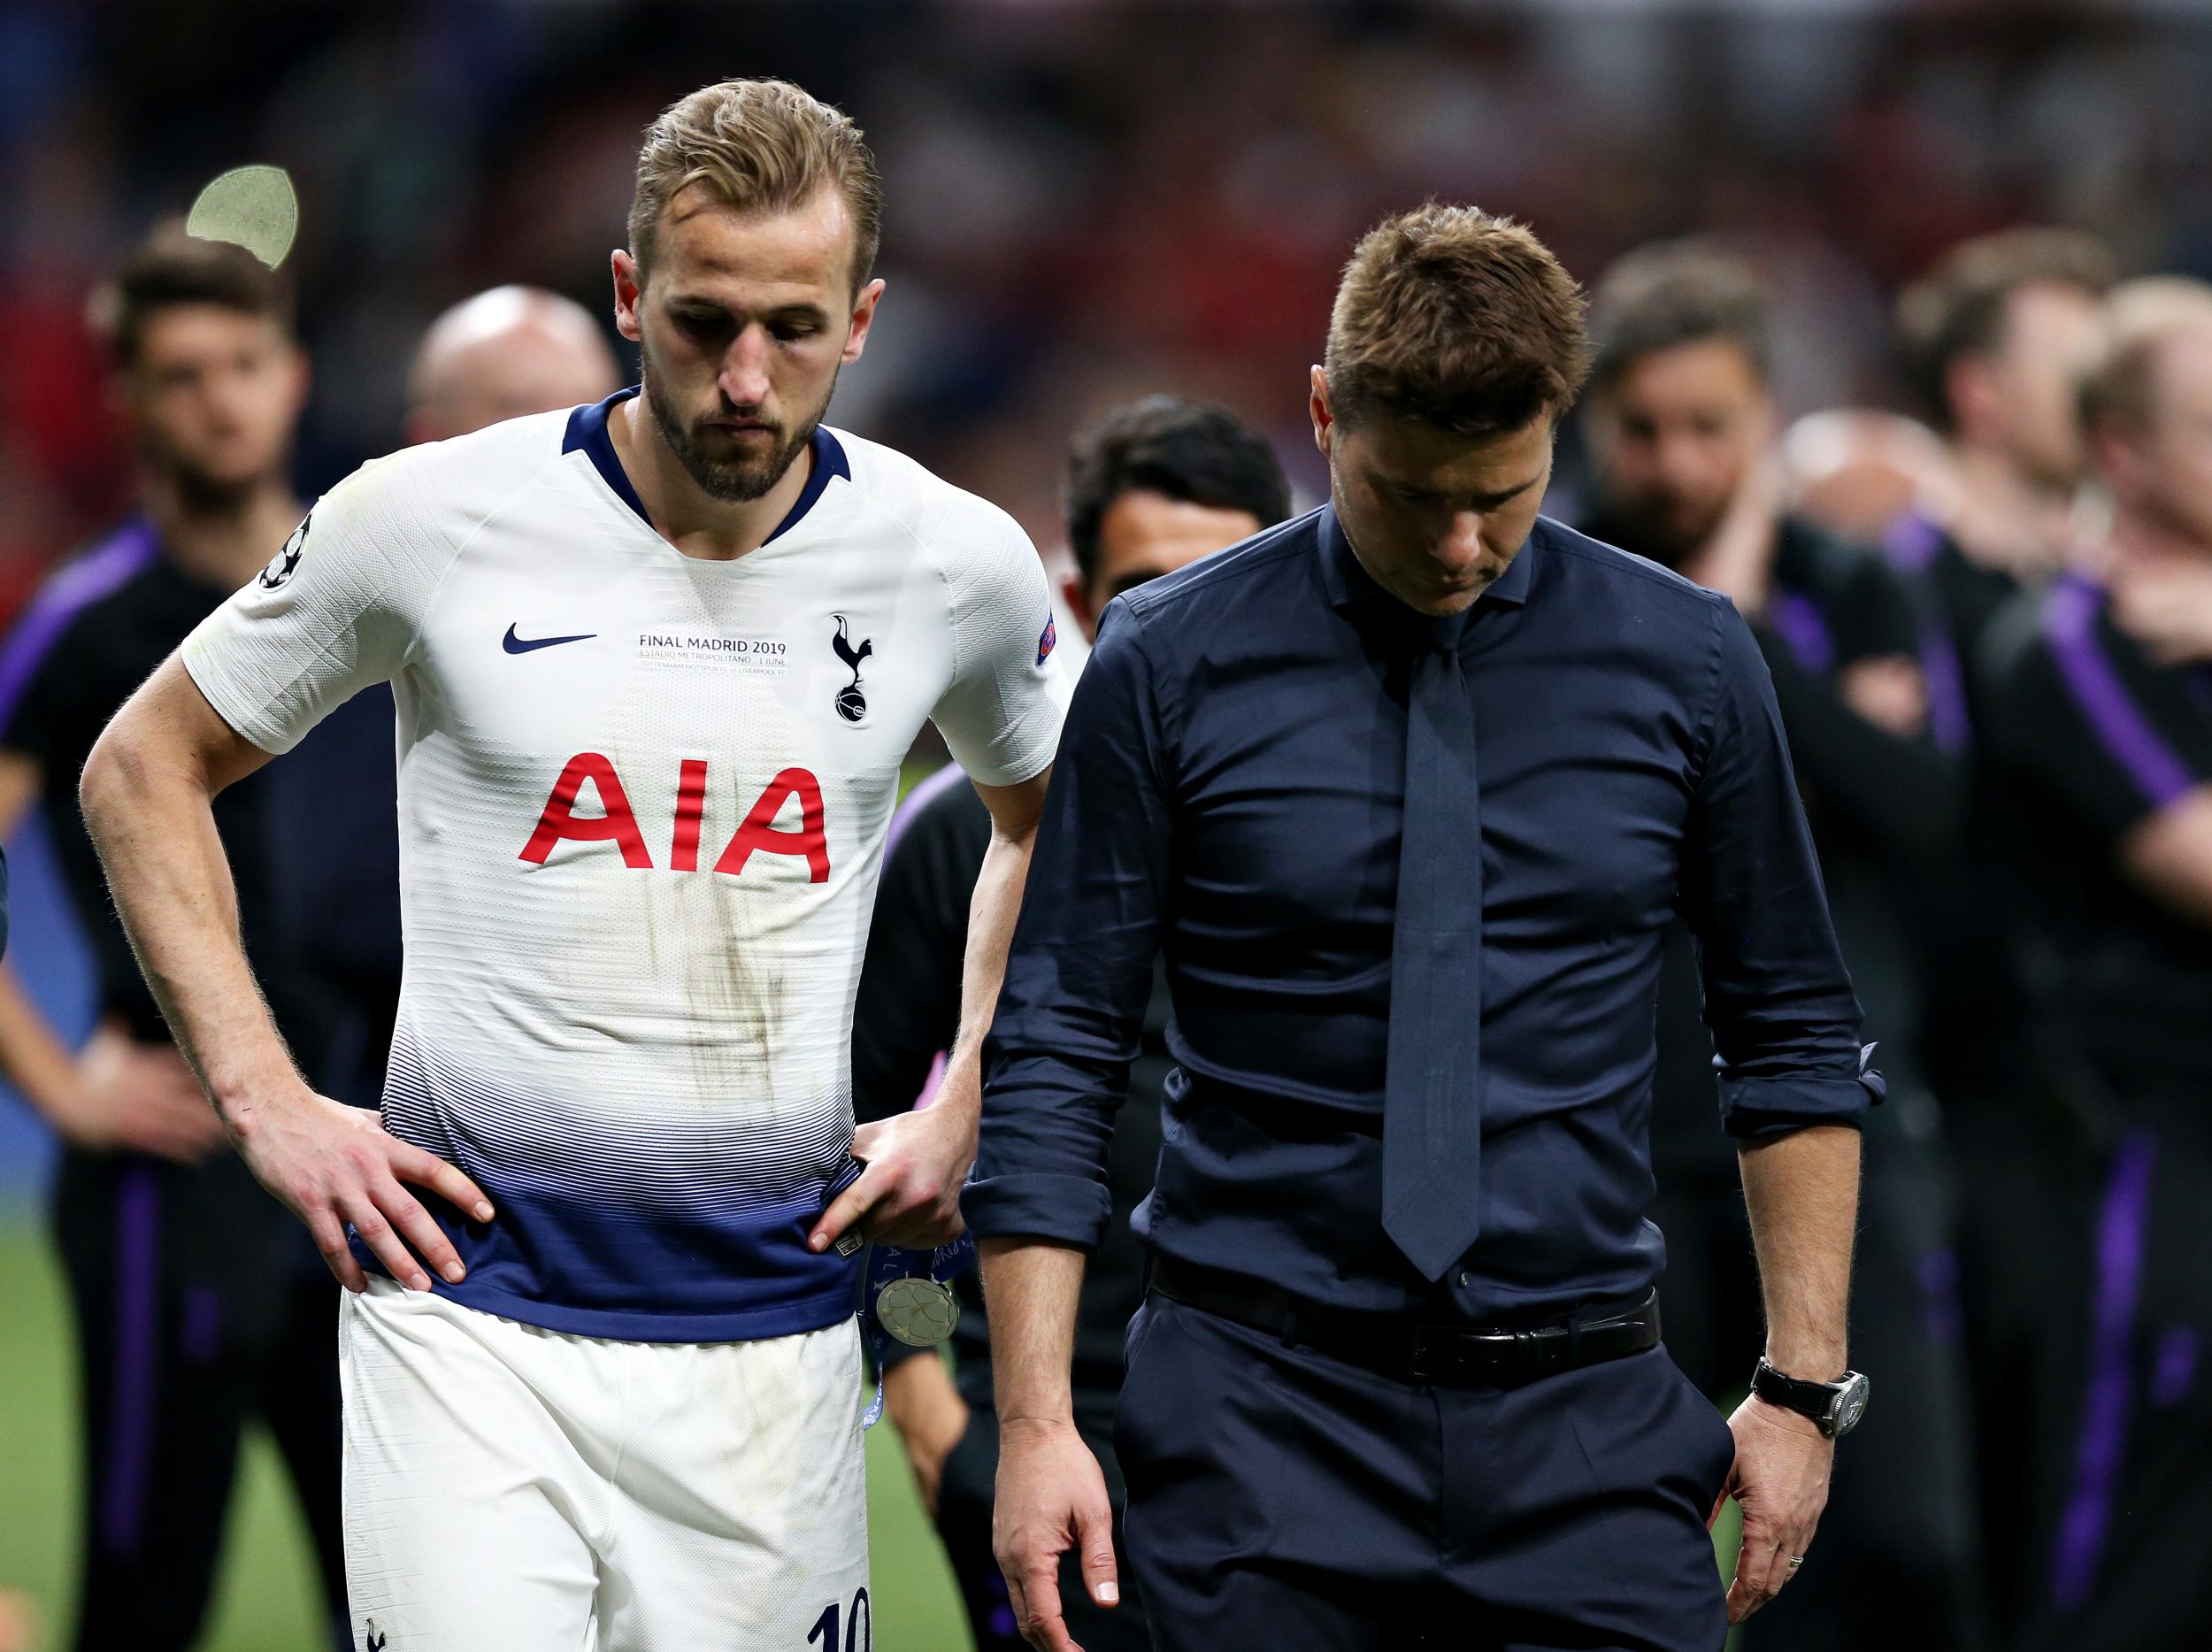 Things were not the same for Pochettino at Spurs after the defeat